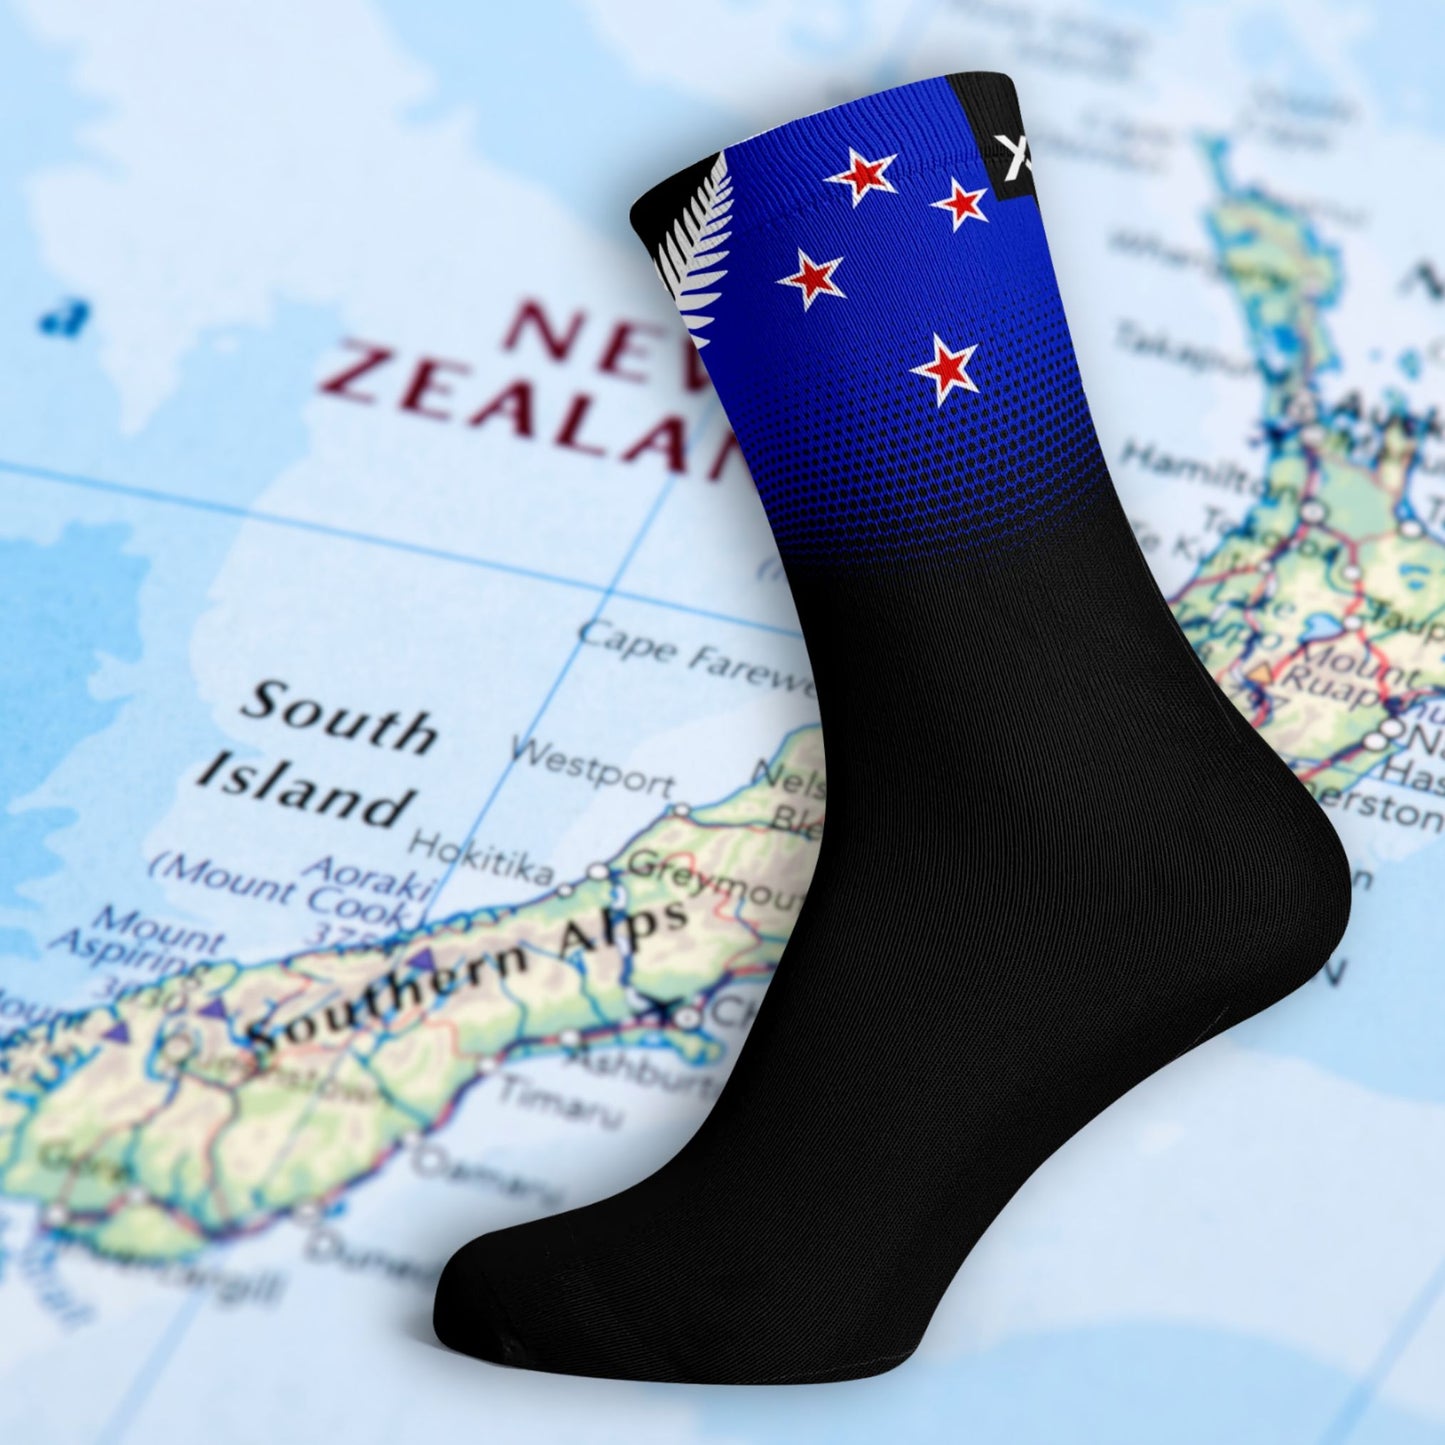 New Zealand Silver Fern design sock. Black socks with blue bank on top featuring the southern cross and the silver fern icon. The background is of a NZ map